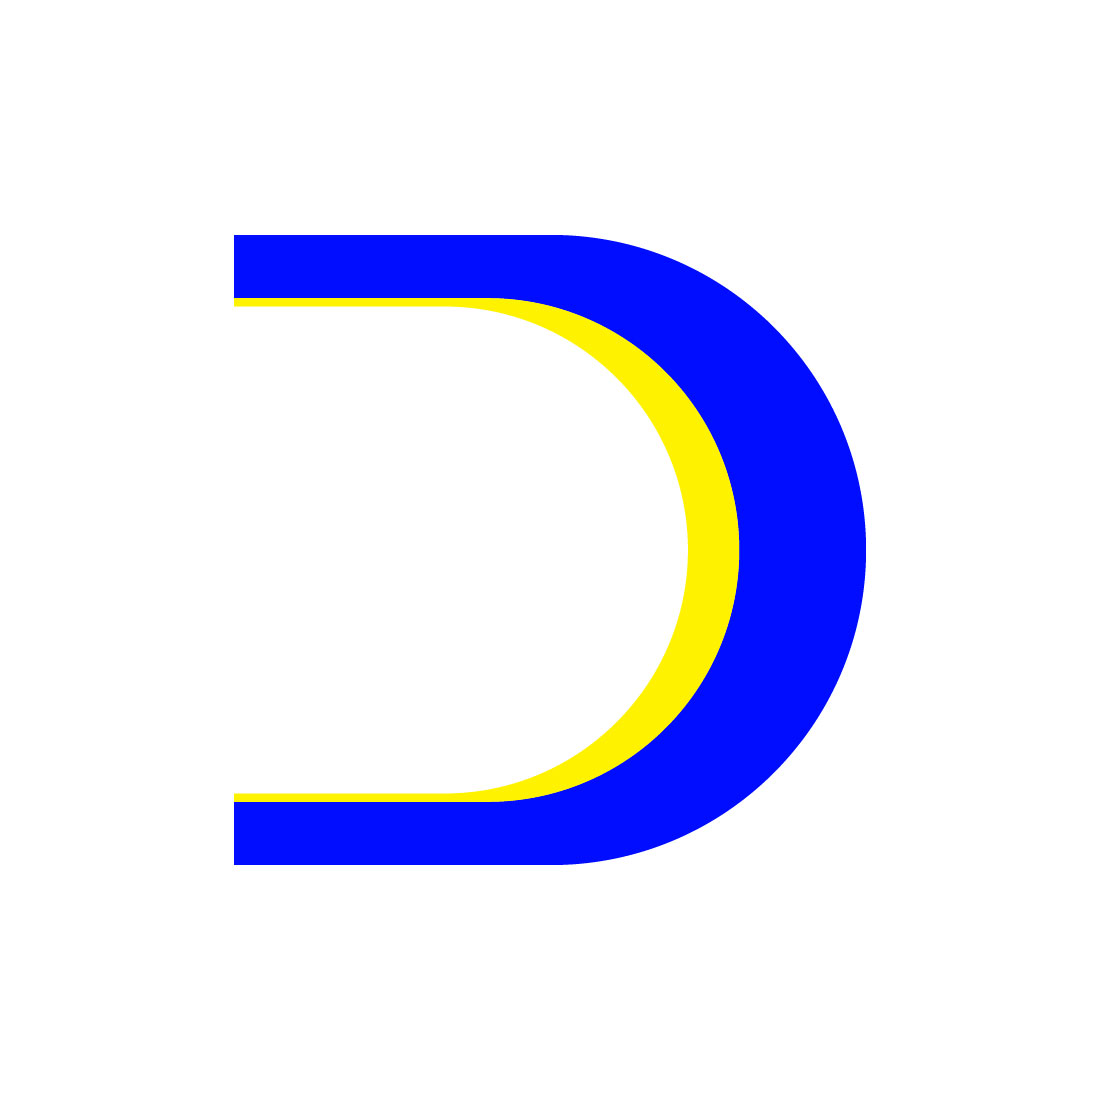 Deluxe Letter D Logo cover image.